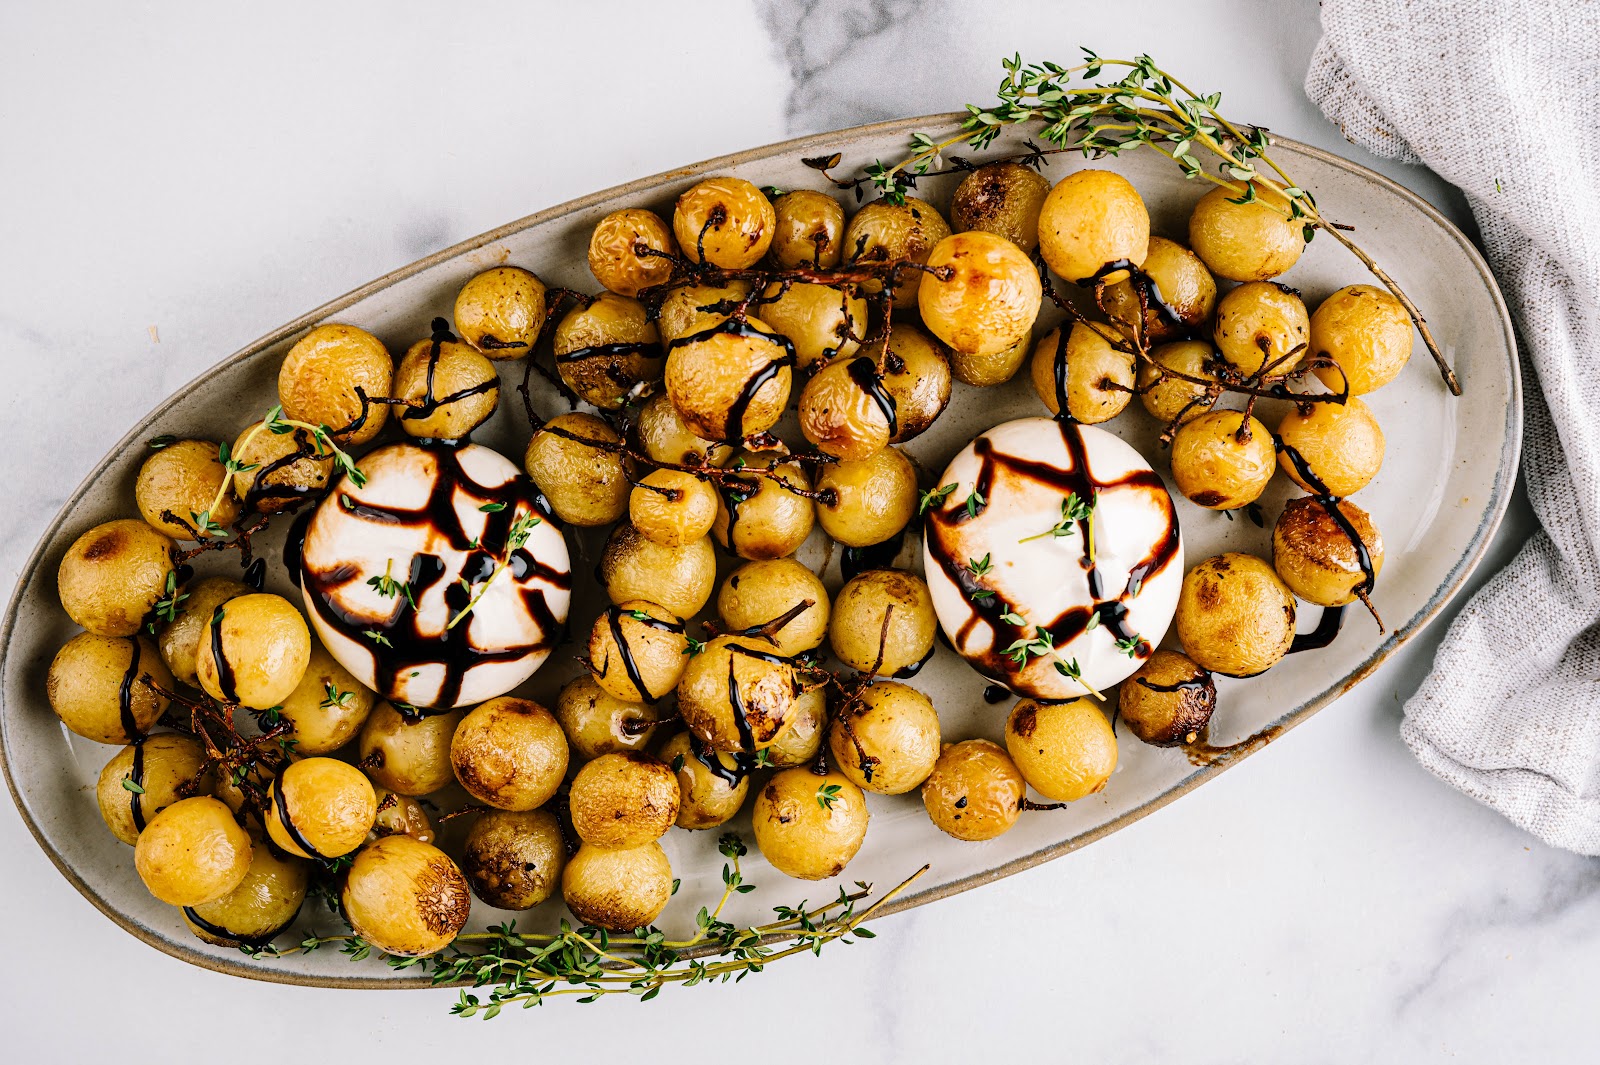 Transfer grapes to a serving plate, place burrata through out, and drizzle with balsamic glaze.